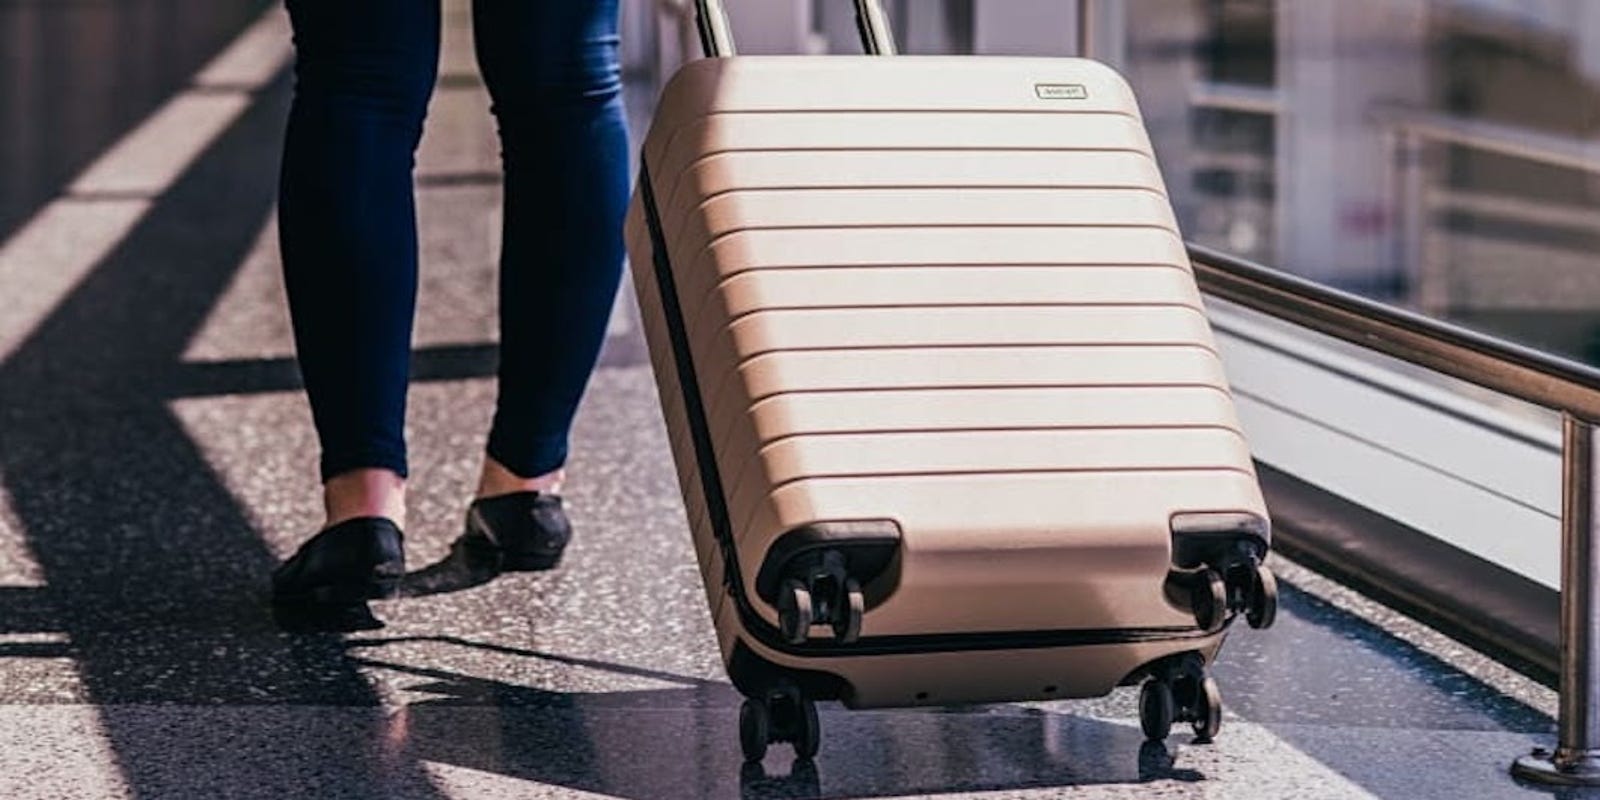 Away luggage sale: The popular travel brand is having its first-ever sale